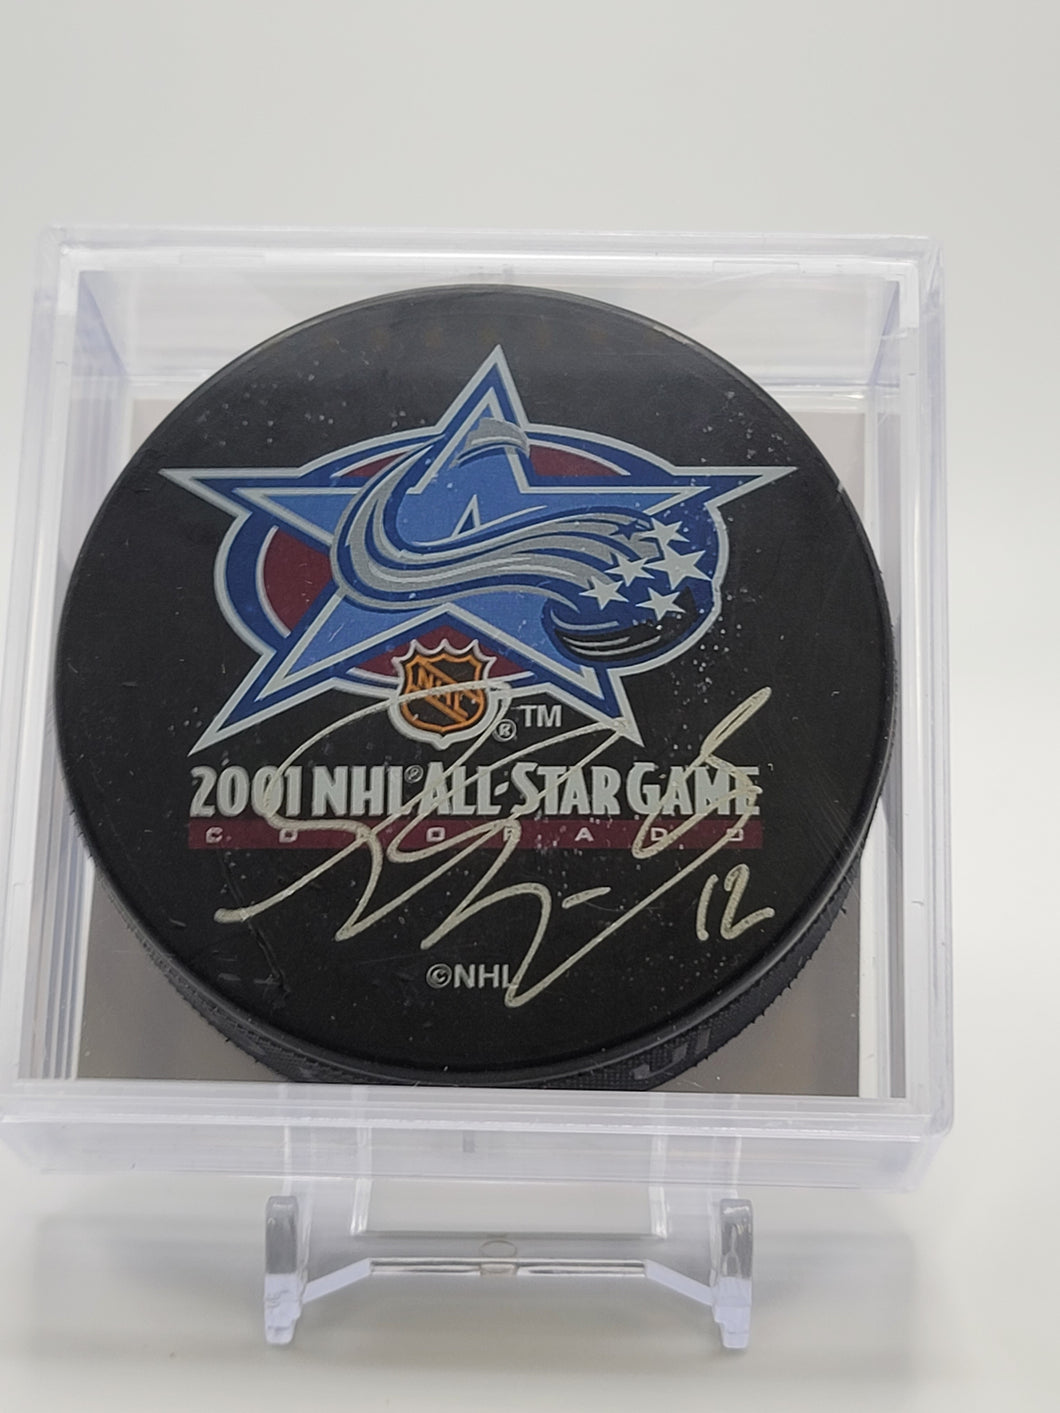 Simon Gagne Signed 2001 NHL All Star Game Official Game Puck - Autographed NHL Puck COJO Hockey Authenticated